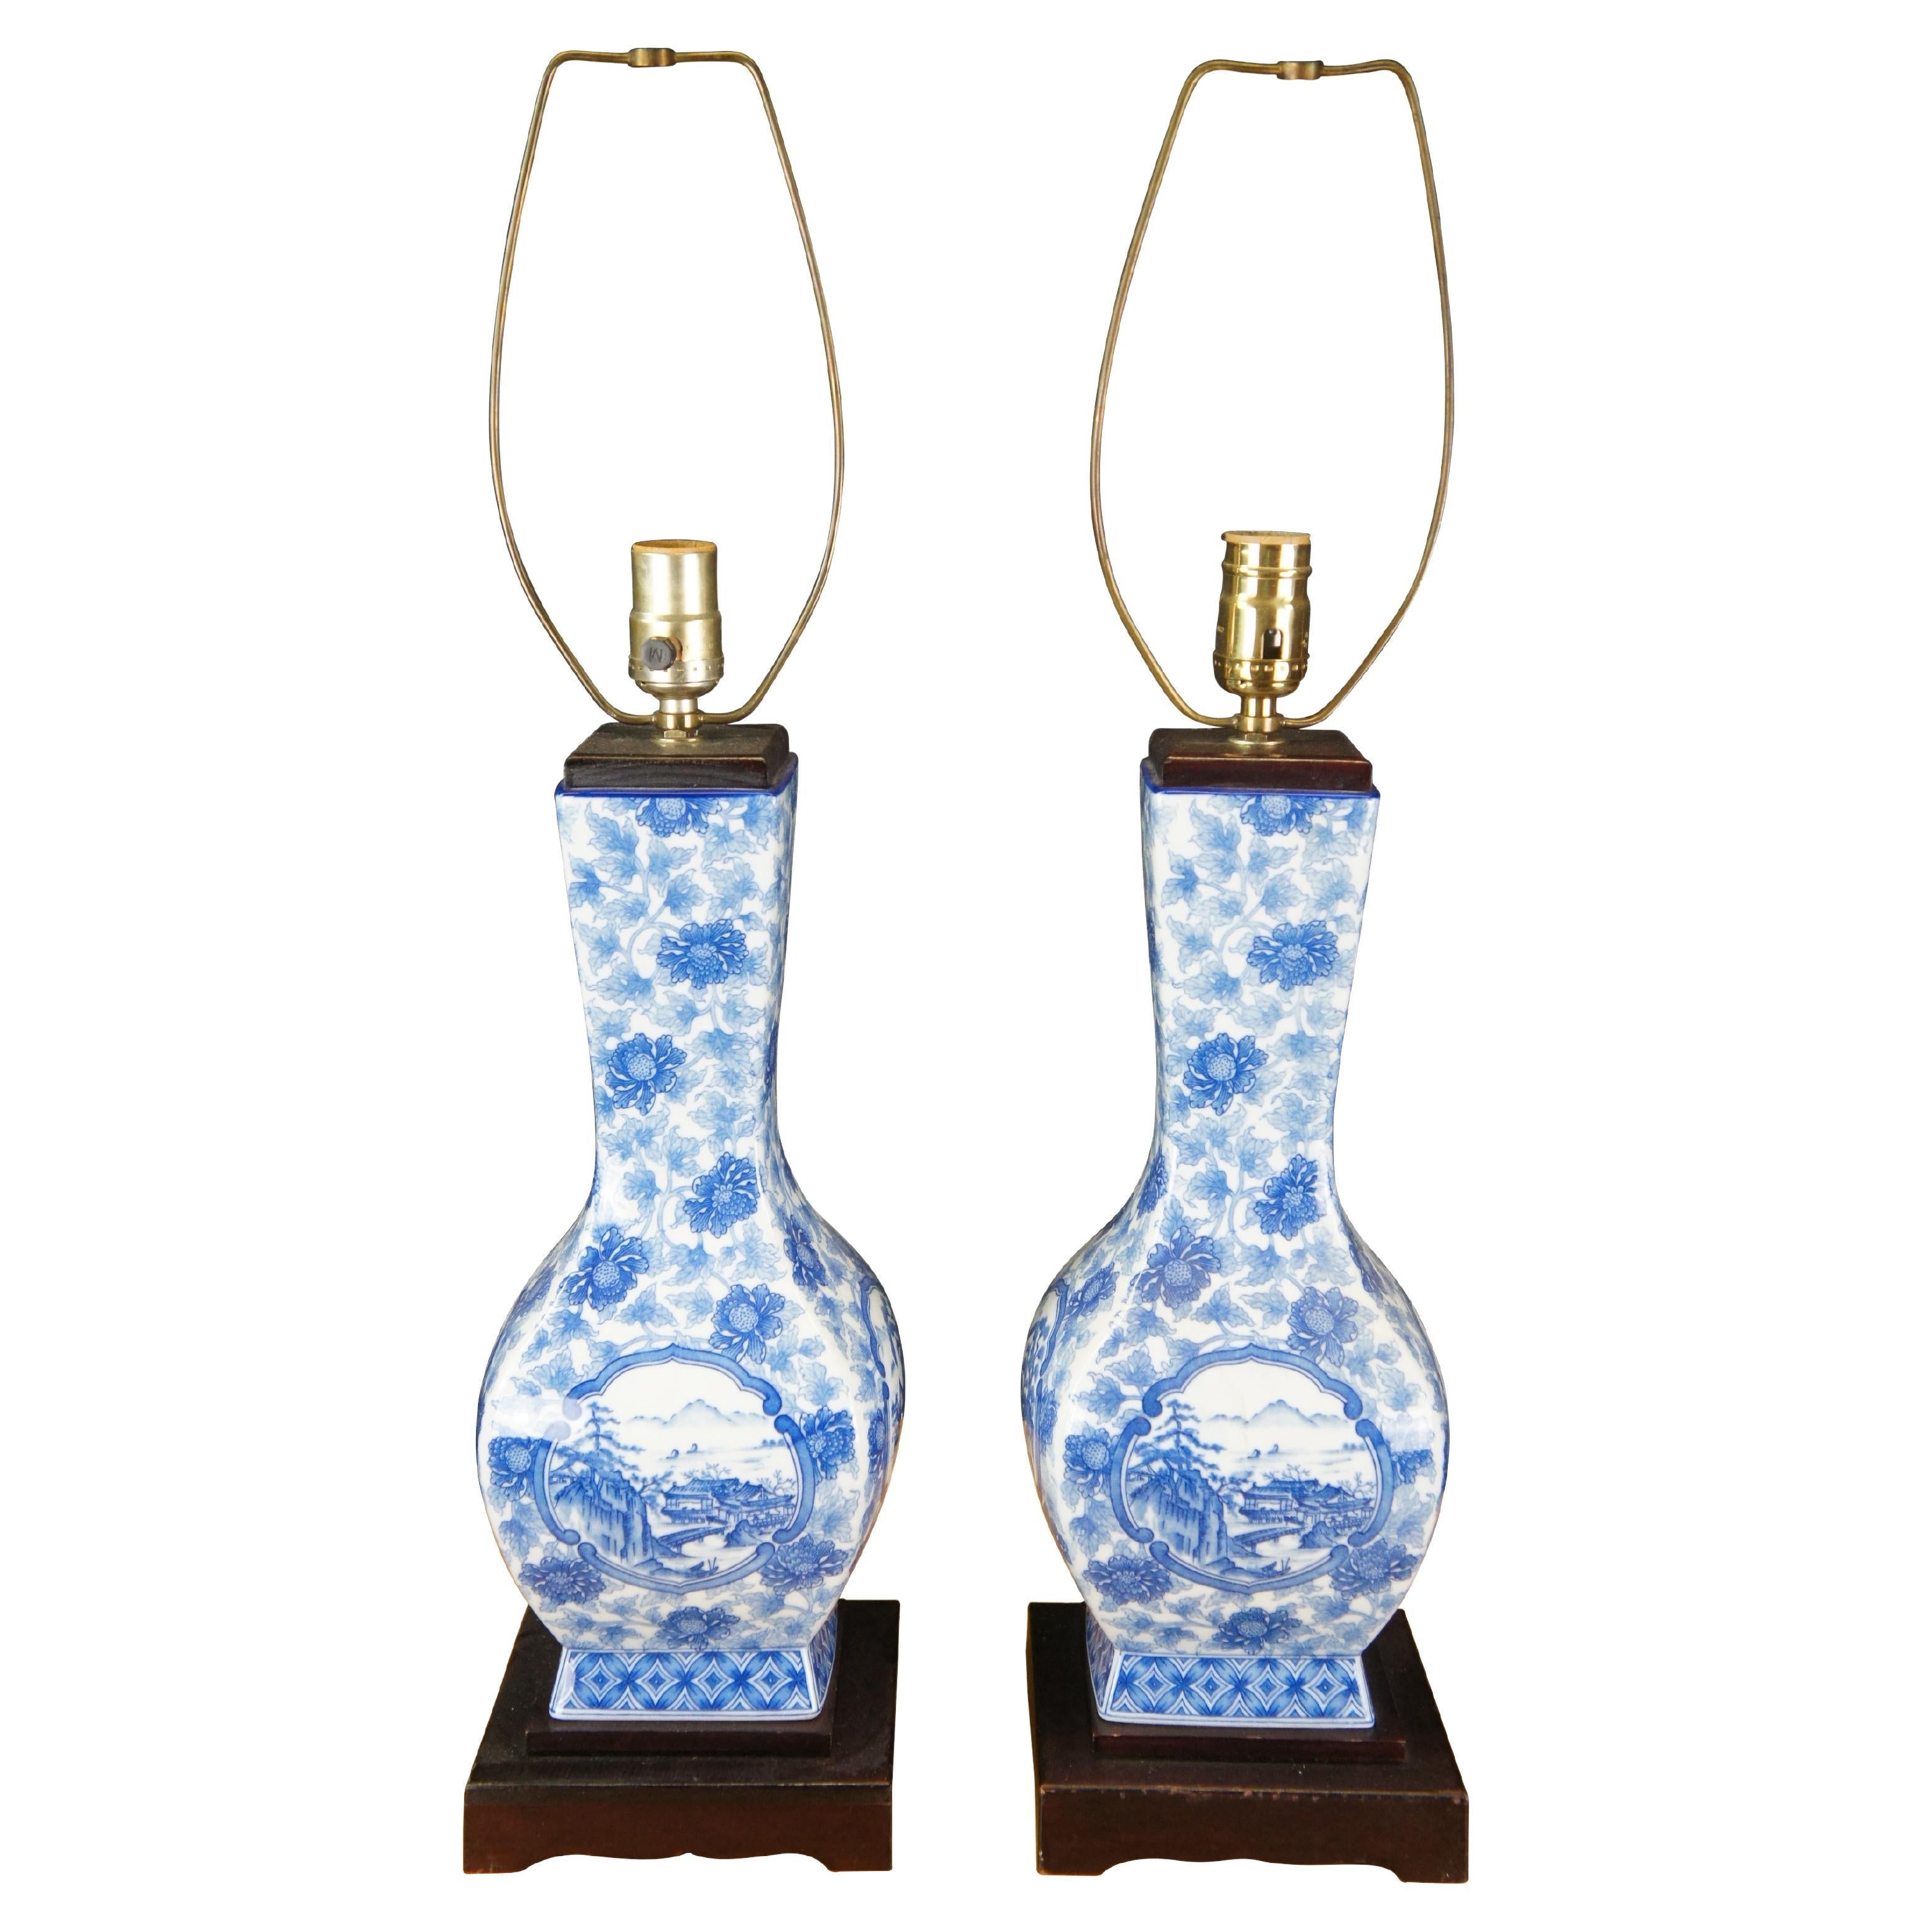 Chinese Blue & White Porcelain Urn Chrysanthemums Pagoda Landscape Table Lamps For Sale